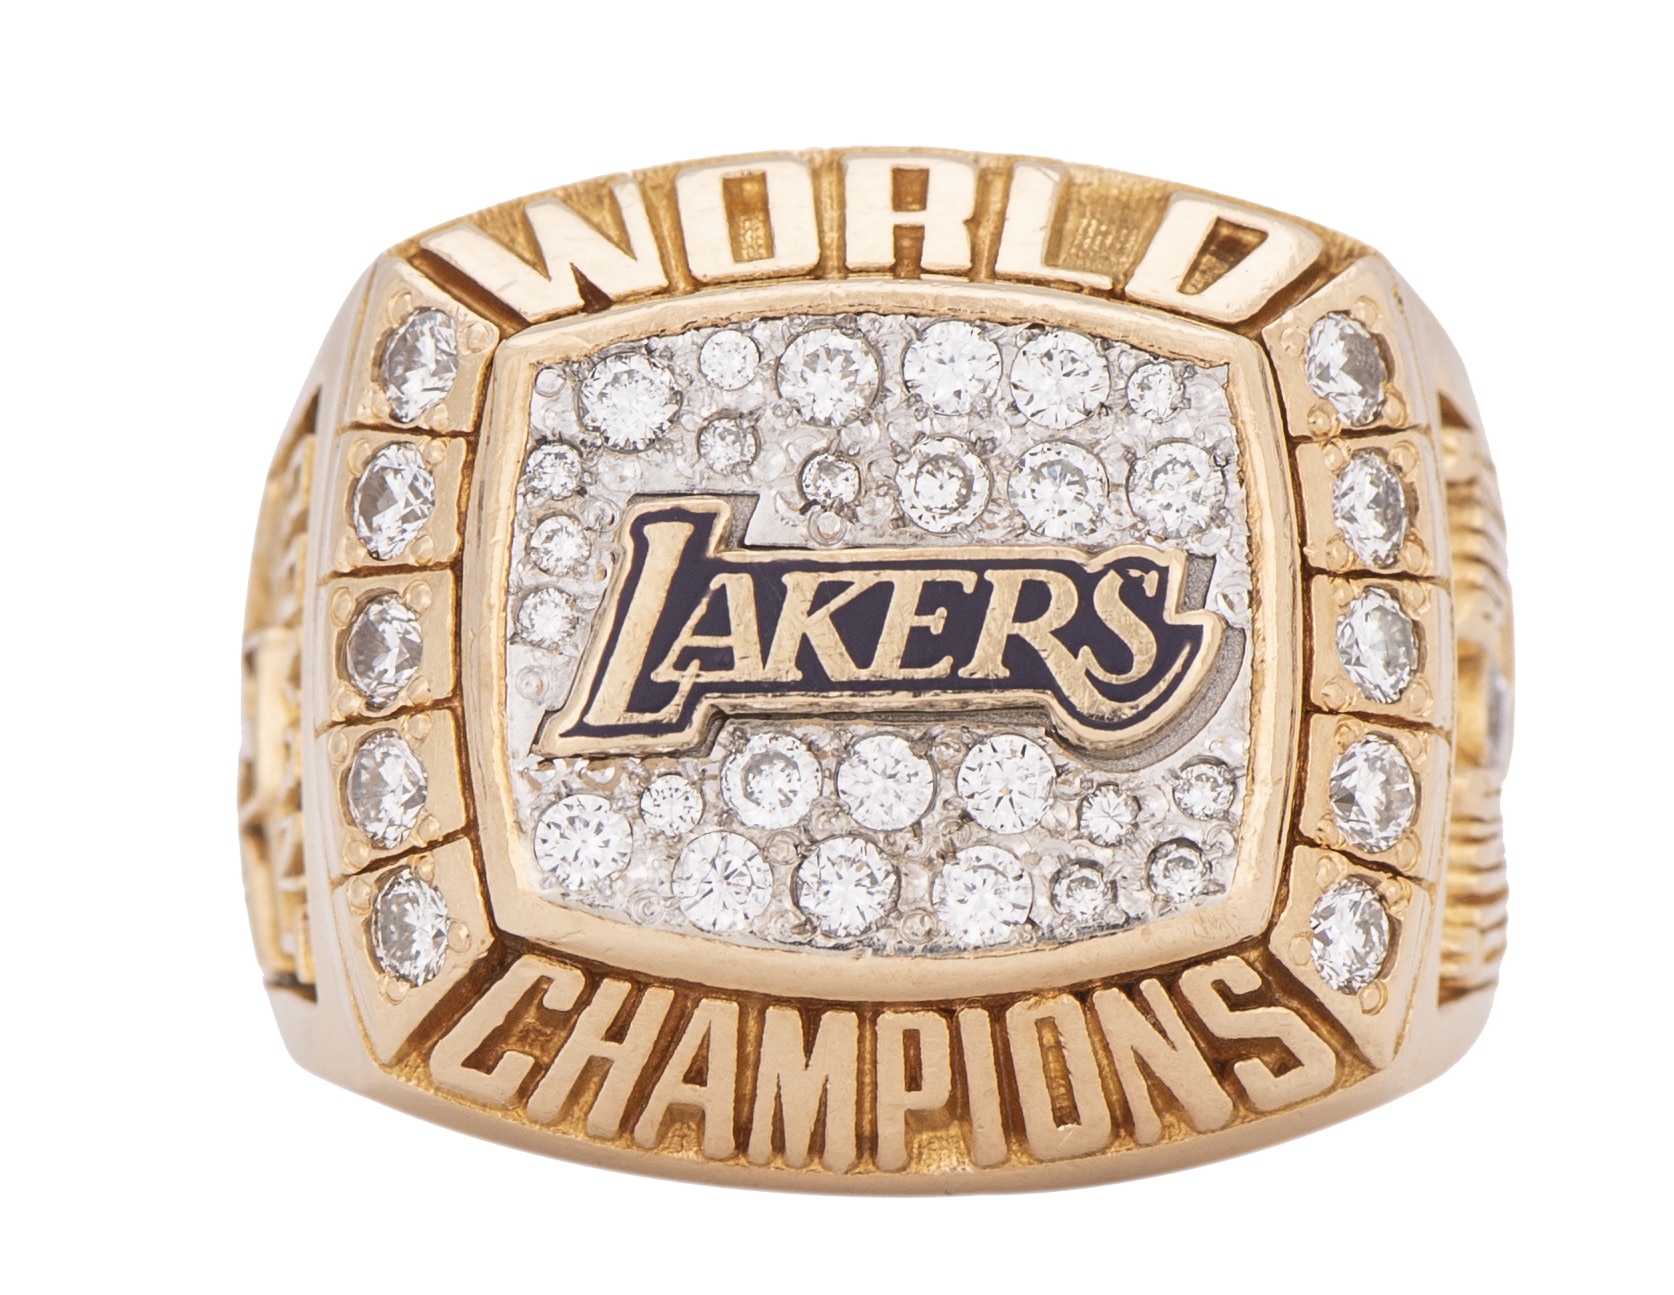 Kobe Bryant NBA Championship Ring Auctions For US$206,000